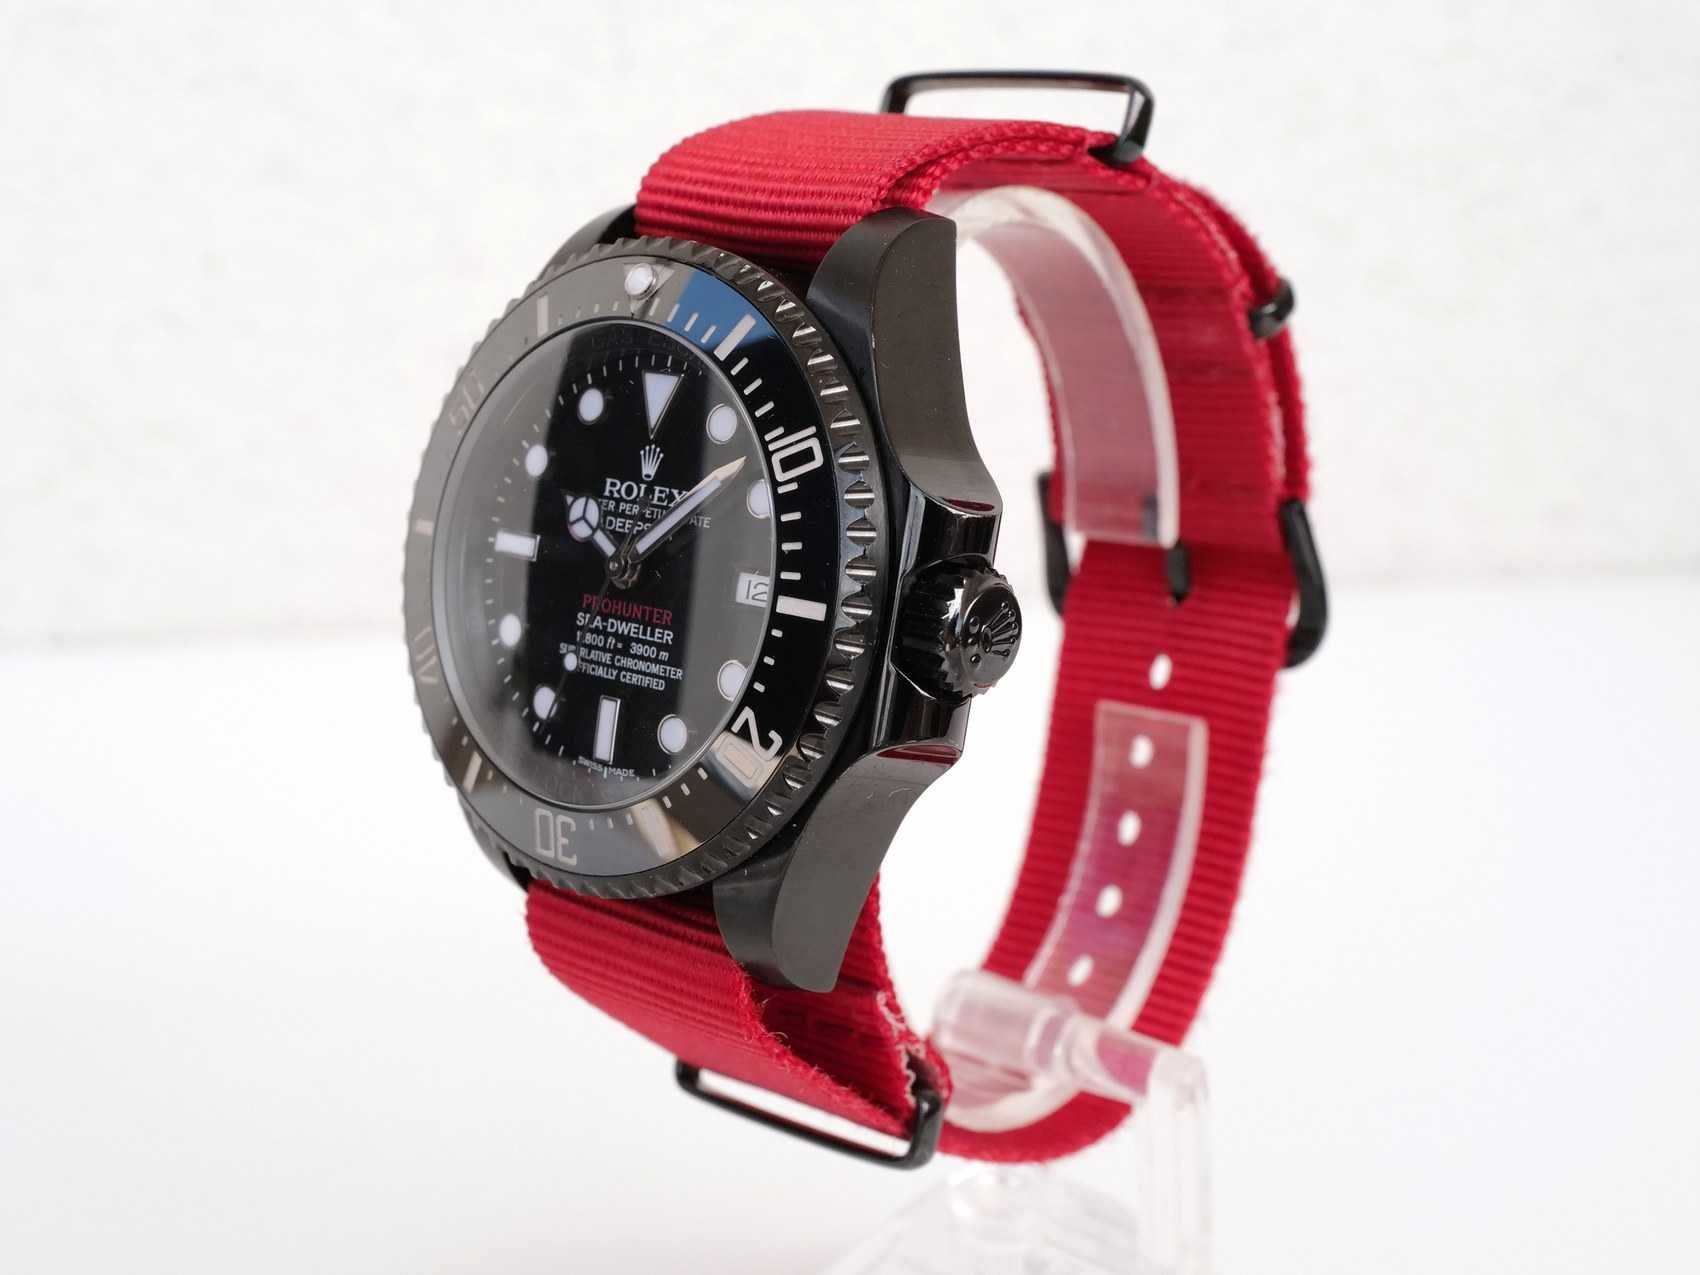 Rolex Deepsea 44 Pro Hunter Single Red Military Limited Edition of 100